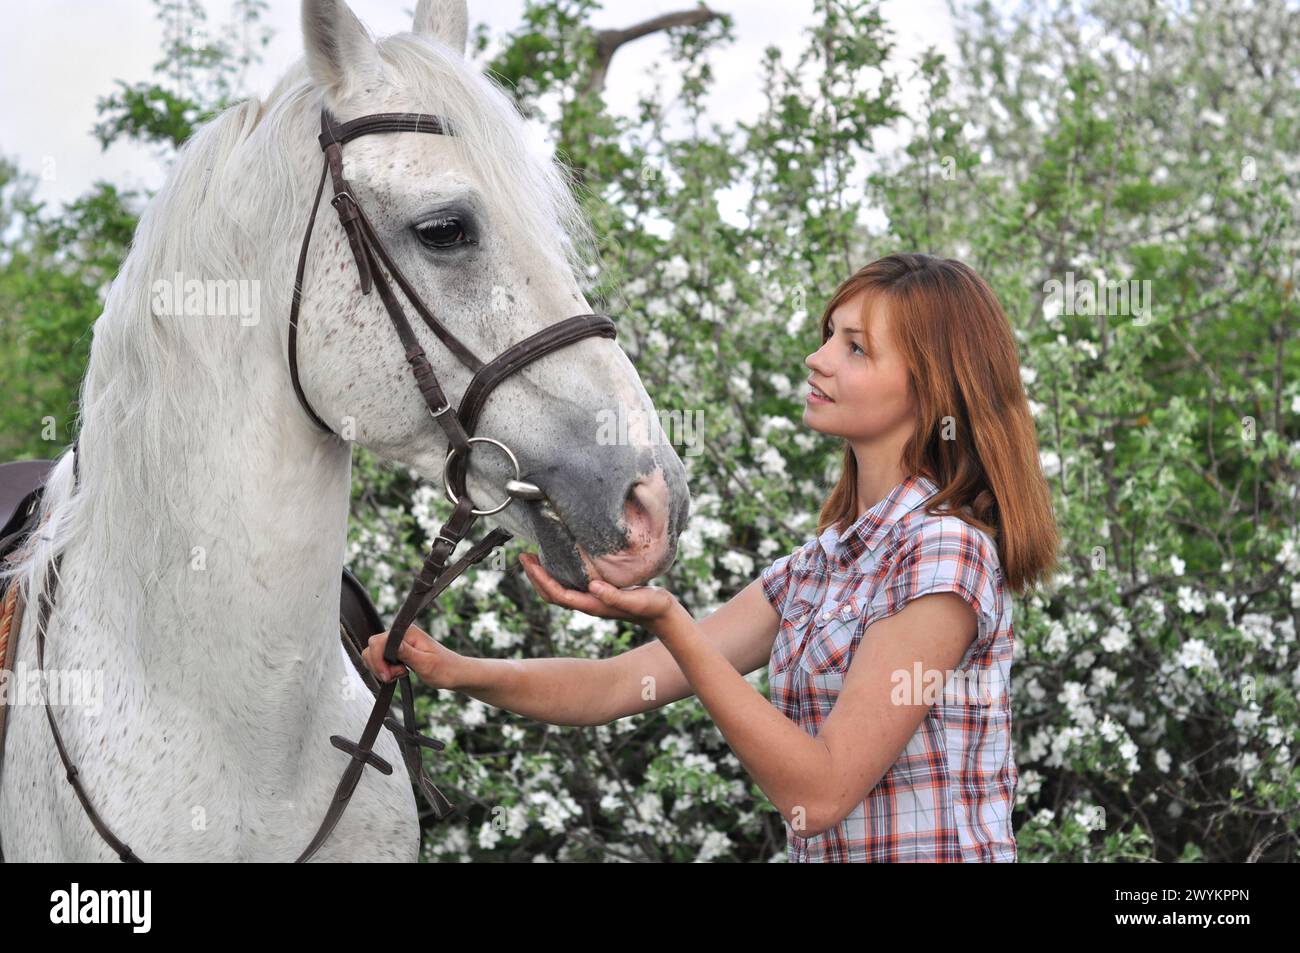 Cherkasy, Ukraine, May 3, 2012. Unknown girl with purebred white horse resting in the apple tree garden at the springtime Stock Photo